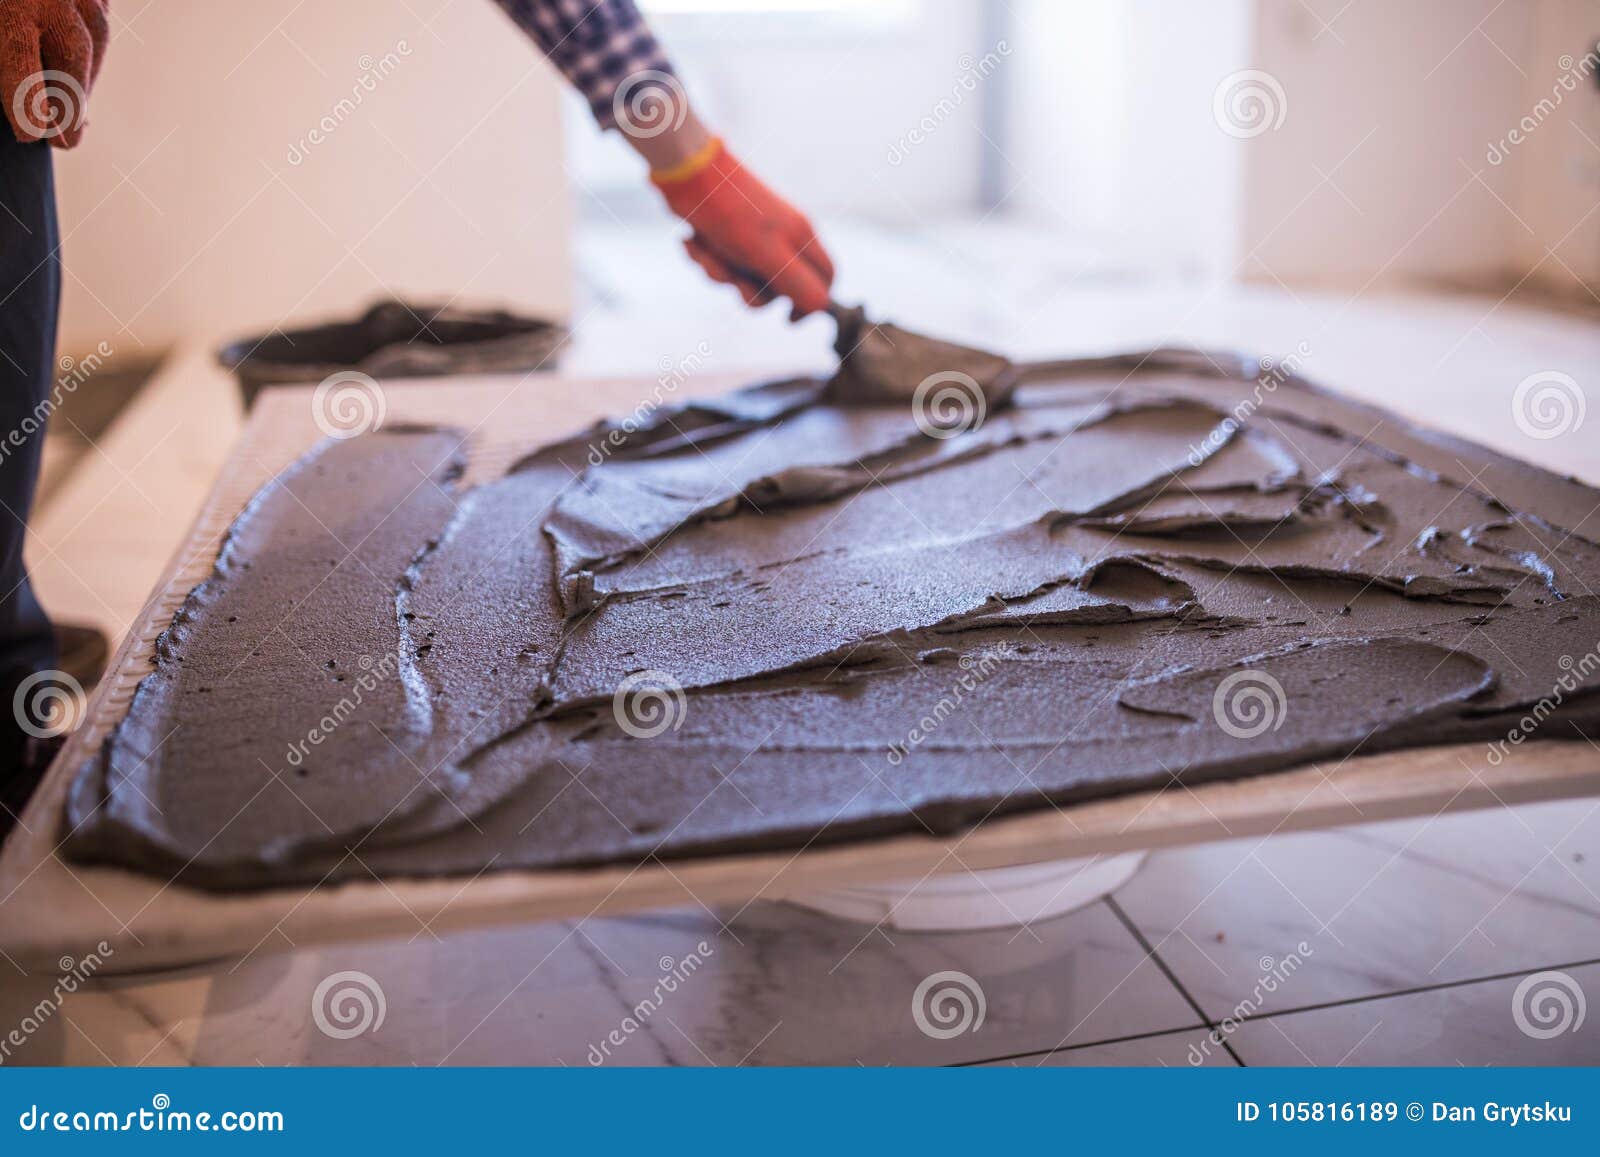 Laying Ceramic Tiles Worker Make Preparation For Laying Floor